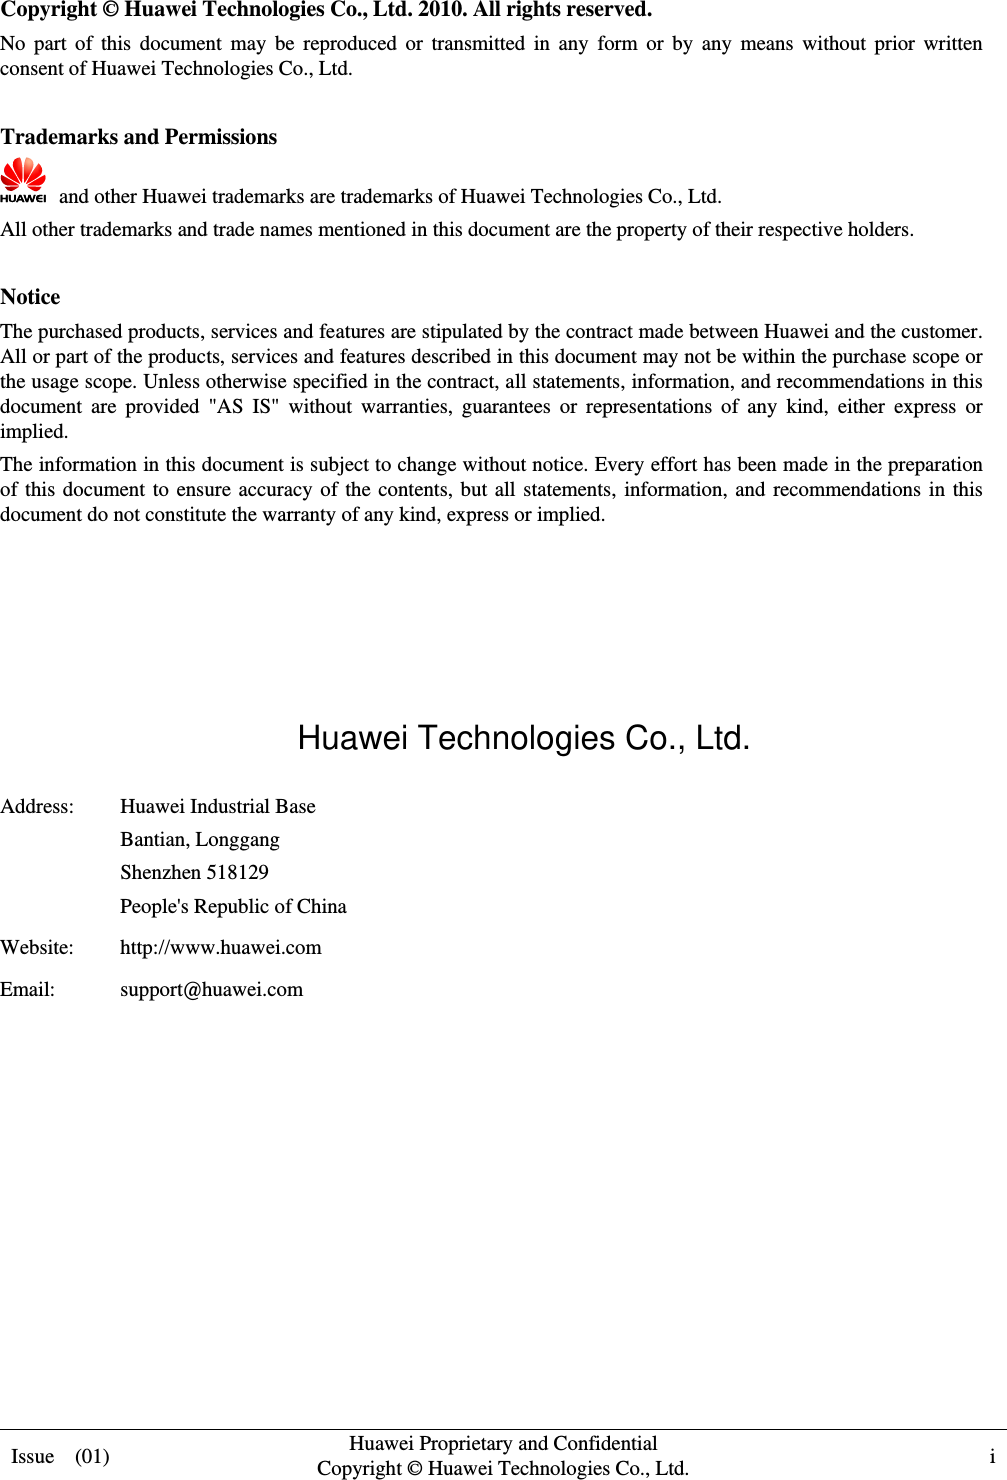  Issue    (01)  Huawei Proprietary and Confidential                                     Copyright © Huawei Technologies Co., Ltd.  i    Copyright © Huawei Technologies Co., Ltd. 2010. All rights reserved. No  part of this  document  may  be  reproduced  or  transmitted in  any  form  or  by  any  means  without prior written consent of Huawei Technologies Co., Ltd.  Trademarks and Permissions   and other Huawei trademarks are trademarks of Huawei Technologies Co., Ltd. All other trademarks and trade names mentioned in this document are the property of their respective holders.  Notice The purchased products, services and features are stipulated by the contract made between Huawei and the customer. All or part of the products, services and features described in this document may not be within the purchase scope or the usage scope. Unless otherwise specified in the contract, all statements, information, and recommendations in this document  are  provided  &quot;AS  IS&quot;  without  warranties, guarantees or  representations  of  any  kind,  either express  or implied. The information in this document is subject to change without notice. Every effort has been made in the preparation of this document to ensure accuracy of the contents, but all statements, information, and recommendations in this document do not constitute the warranty of any kind, express or implied.     Huawei Technologies Co., Ltd. Address:  Huawei Industrial Base Bantian, Longgang Shenzhen 518129 People&apos;s Republic of China Website:  http://www.huawei.com Email:  support@huawei.com           